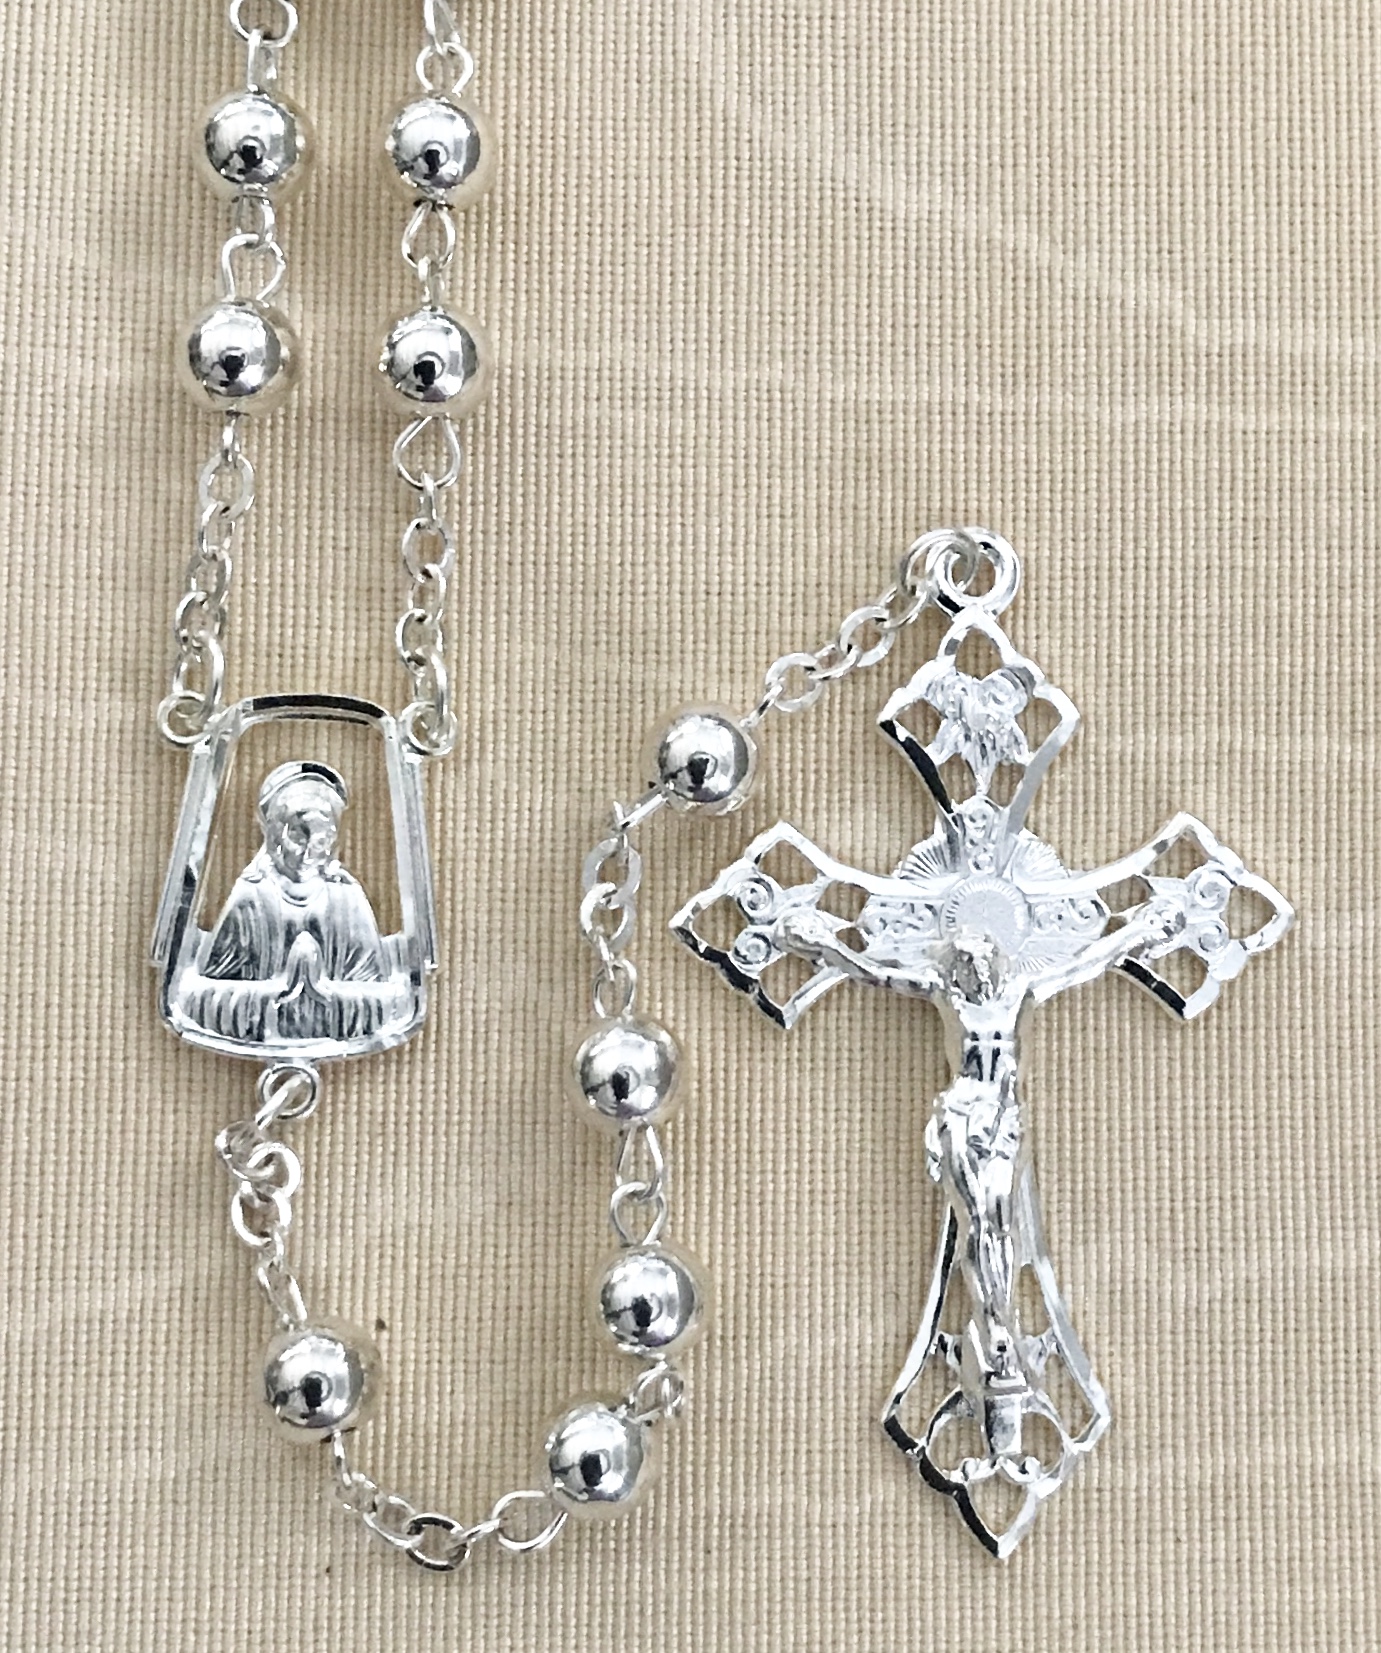 6mm SILVER BEAD ROSARY WITH STERLING SILVER PLATED CRUCIFIX AND CENTER GIFT BOXED